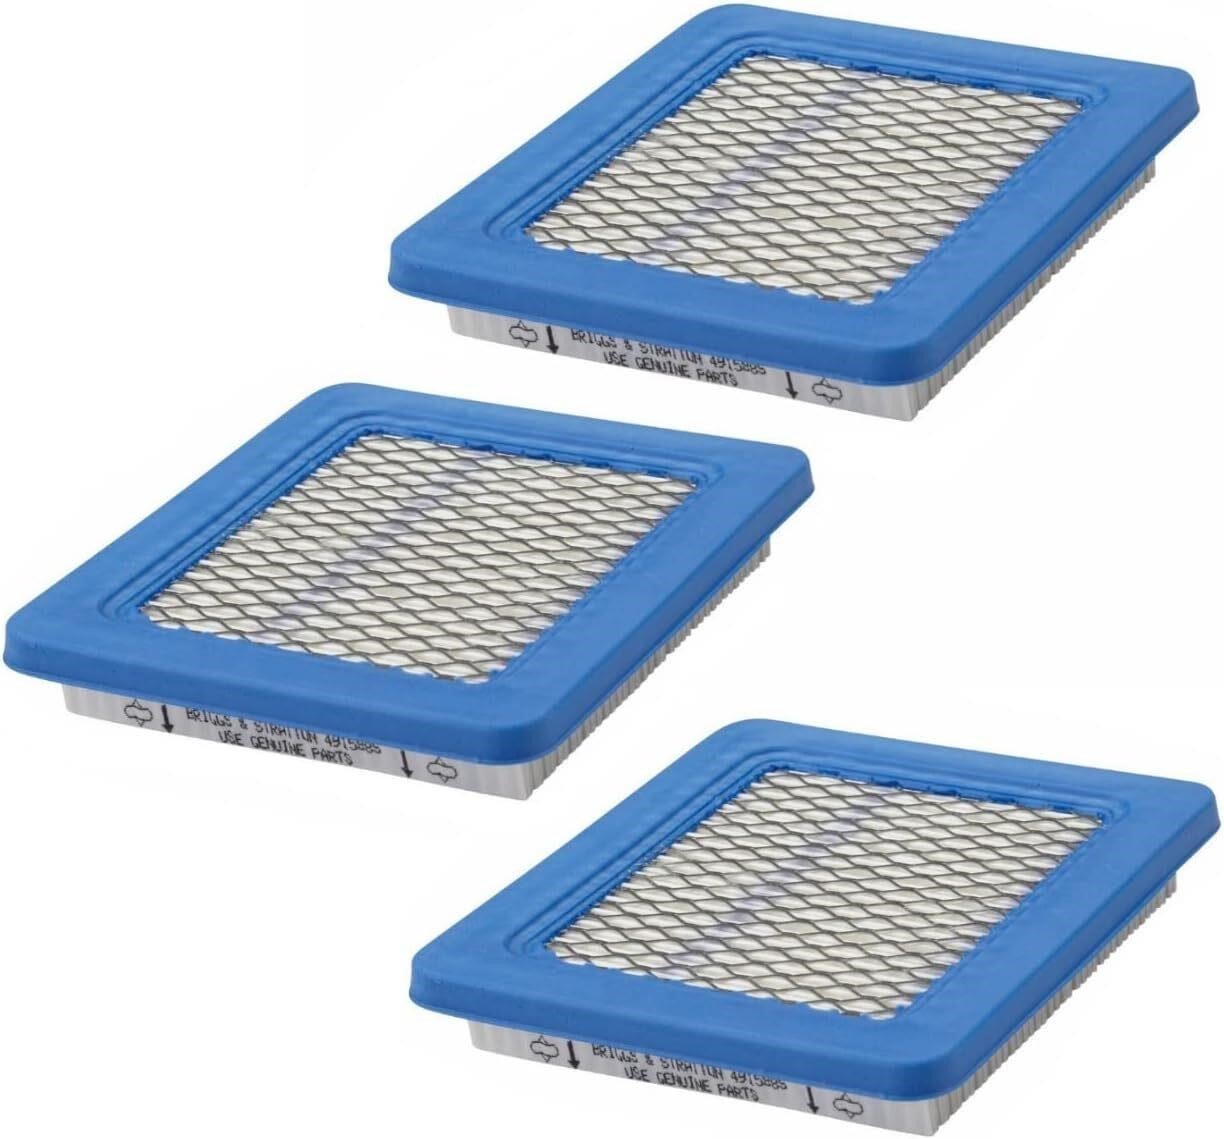 Twelve (12) Briggs and Stratton Air Filters